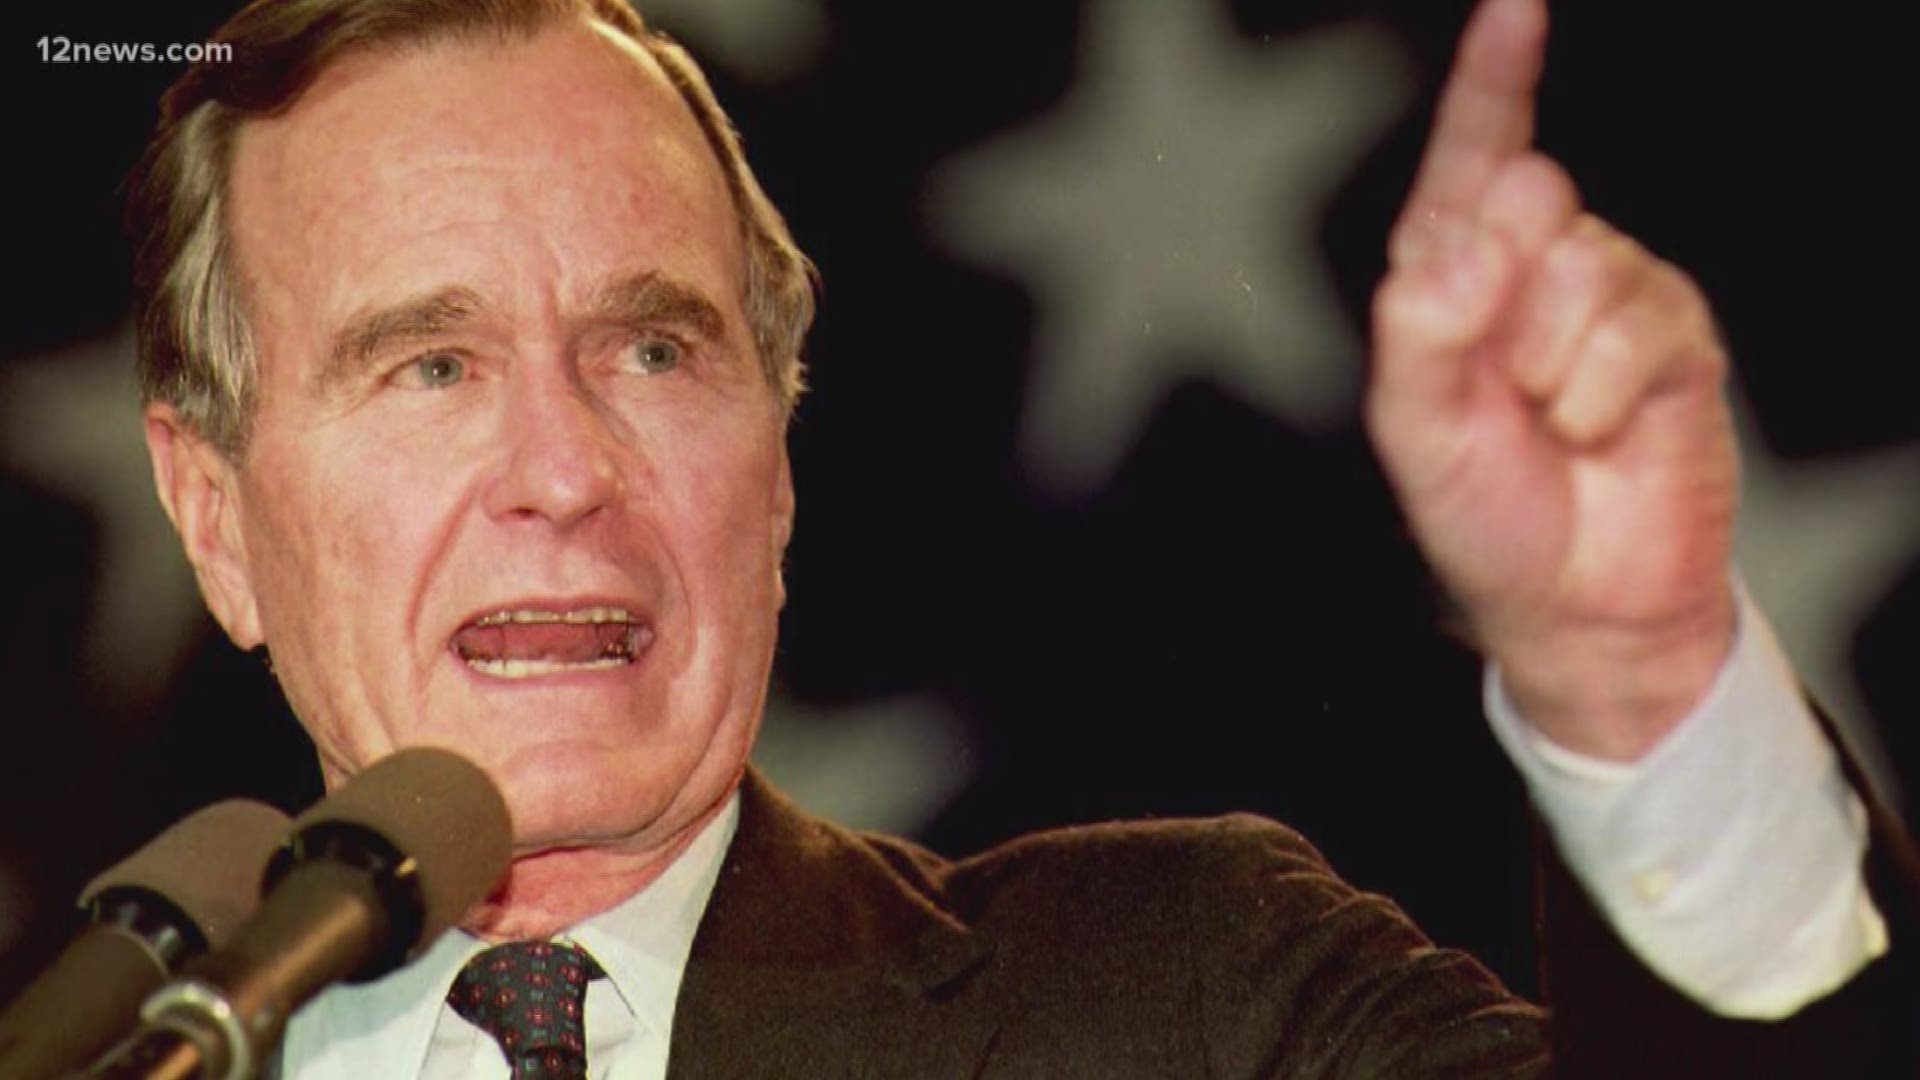 President George H.W. Bush died at the age of 94 after a long life of service to the United States. We look at the impact that he and his policies had on Arizona.